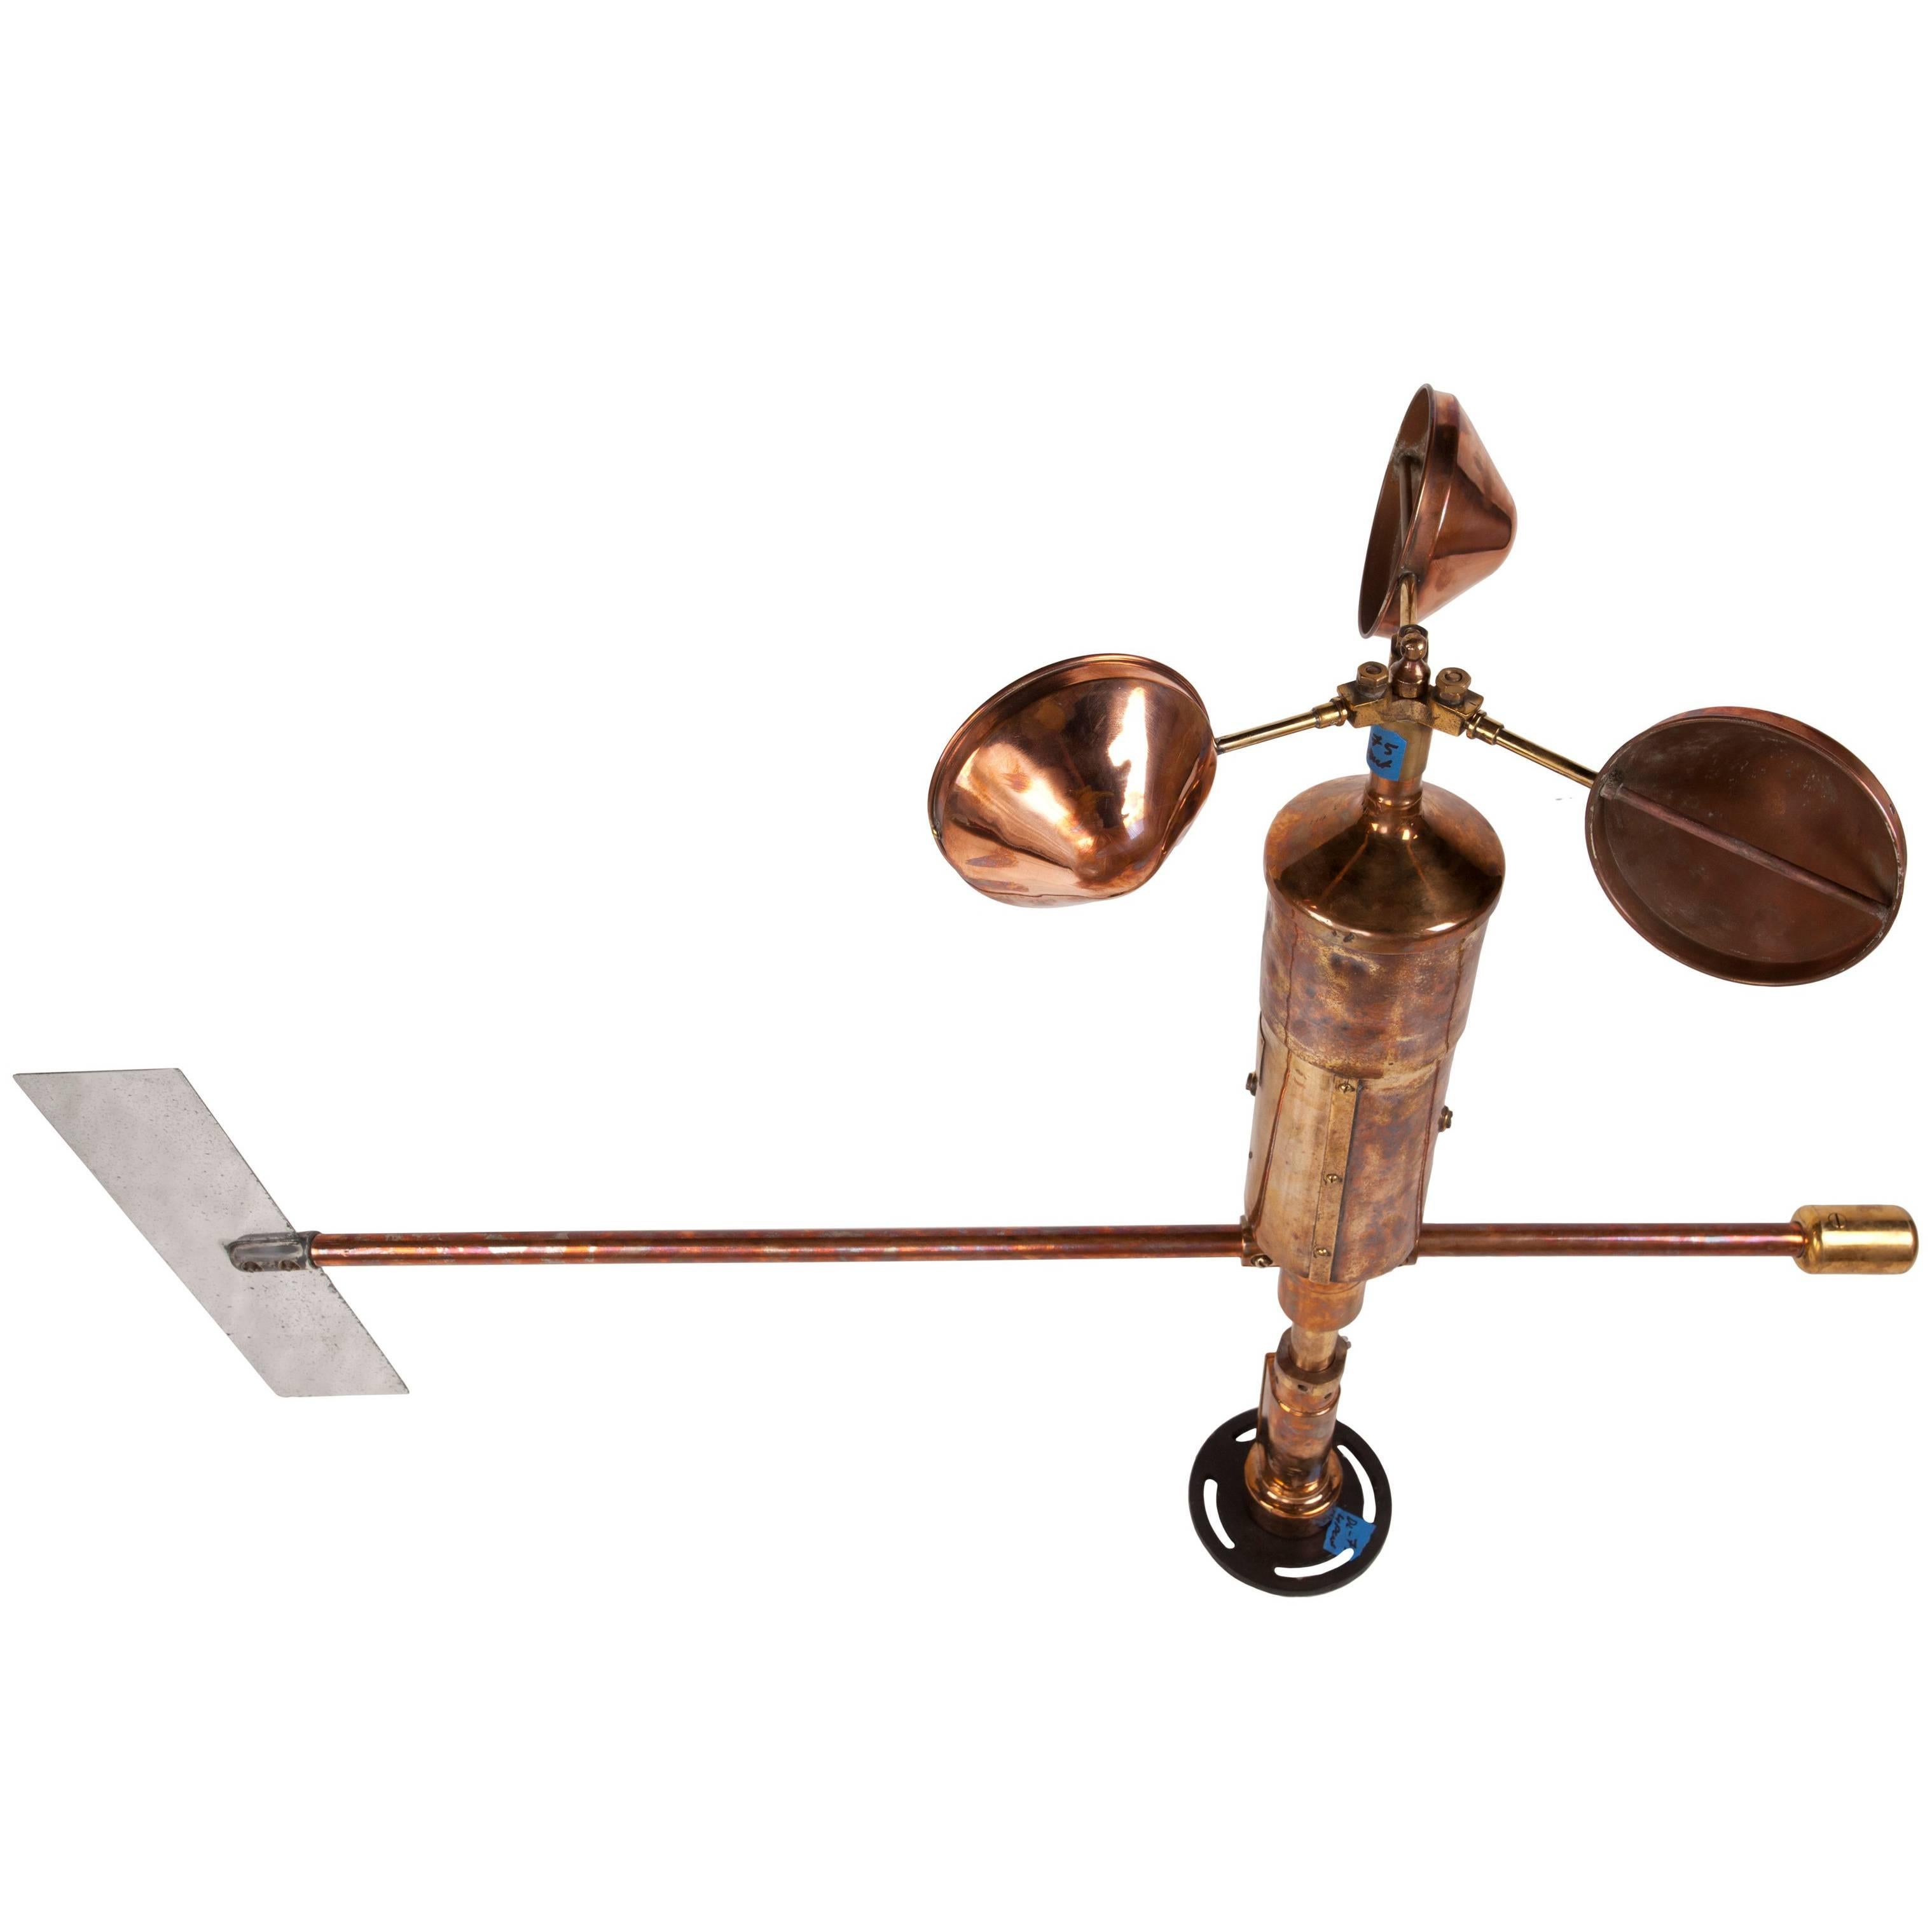 Rare Copper and Brass Ship's Anemometer Signed by Munro from London, 1970s